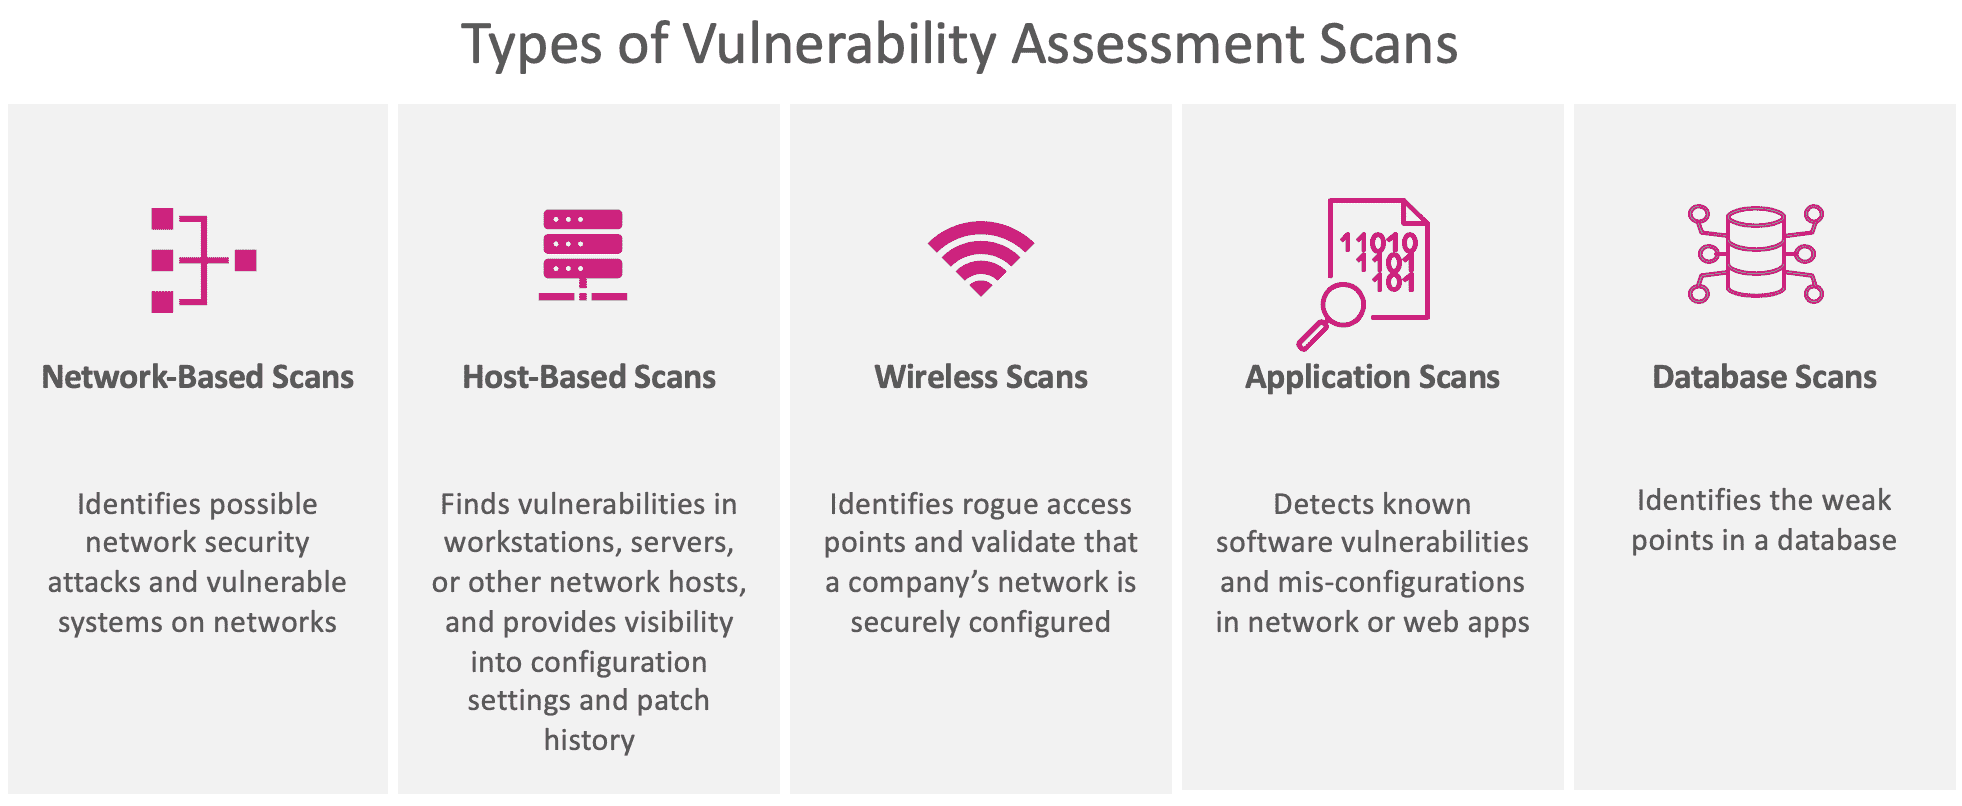  Automated cloud vulnerability scanning using Nessus, Qualys, and OpenVAS tools to identify potential risks and provide visibility into configuration and patch history.